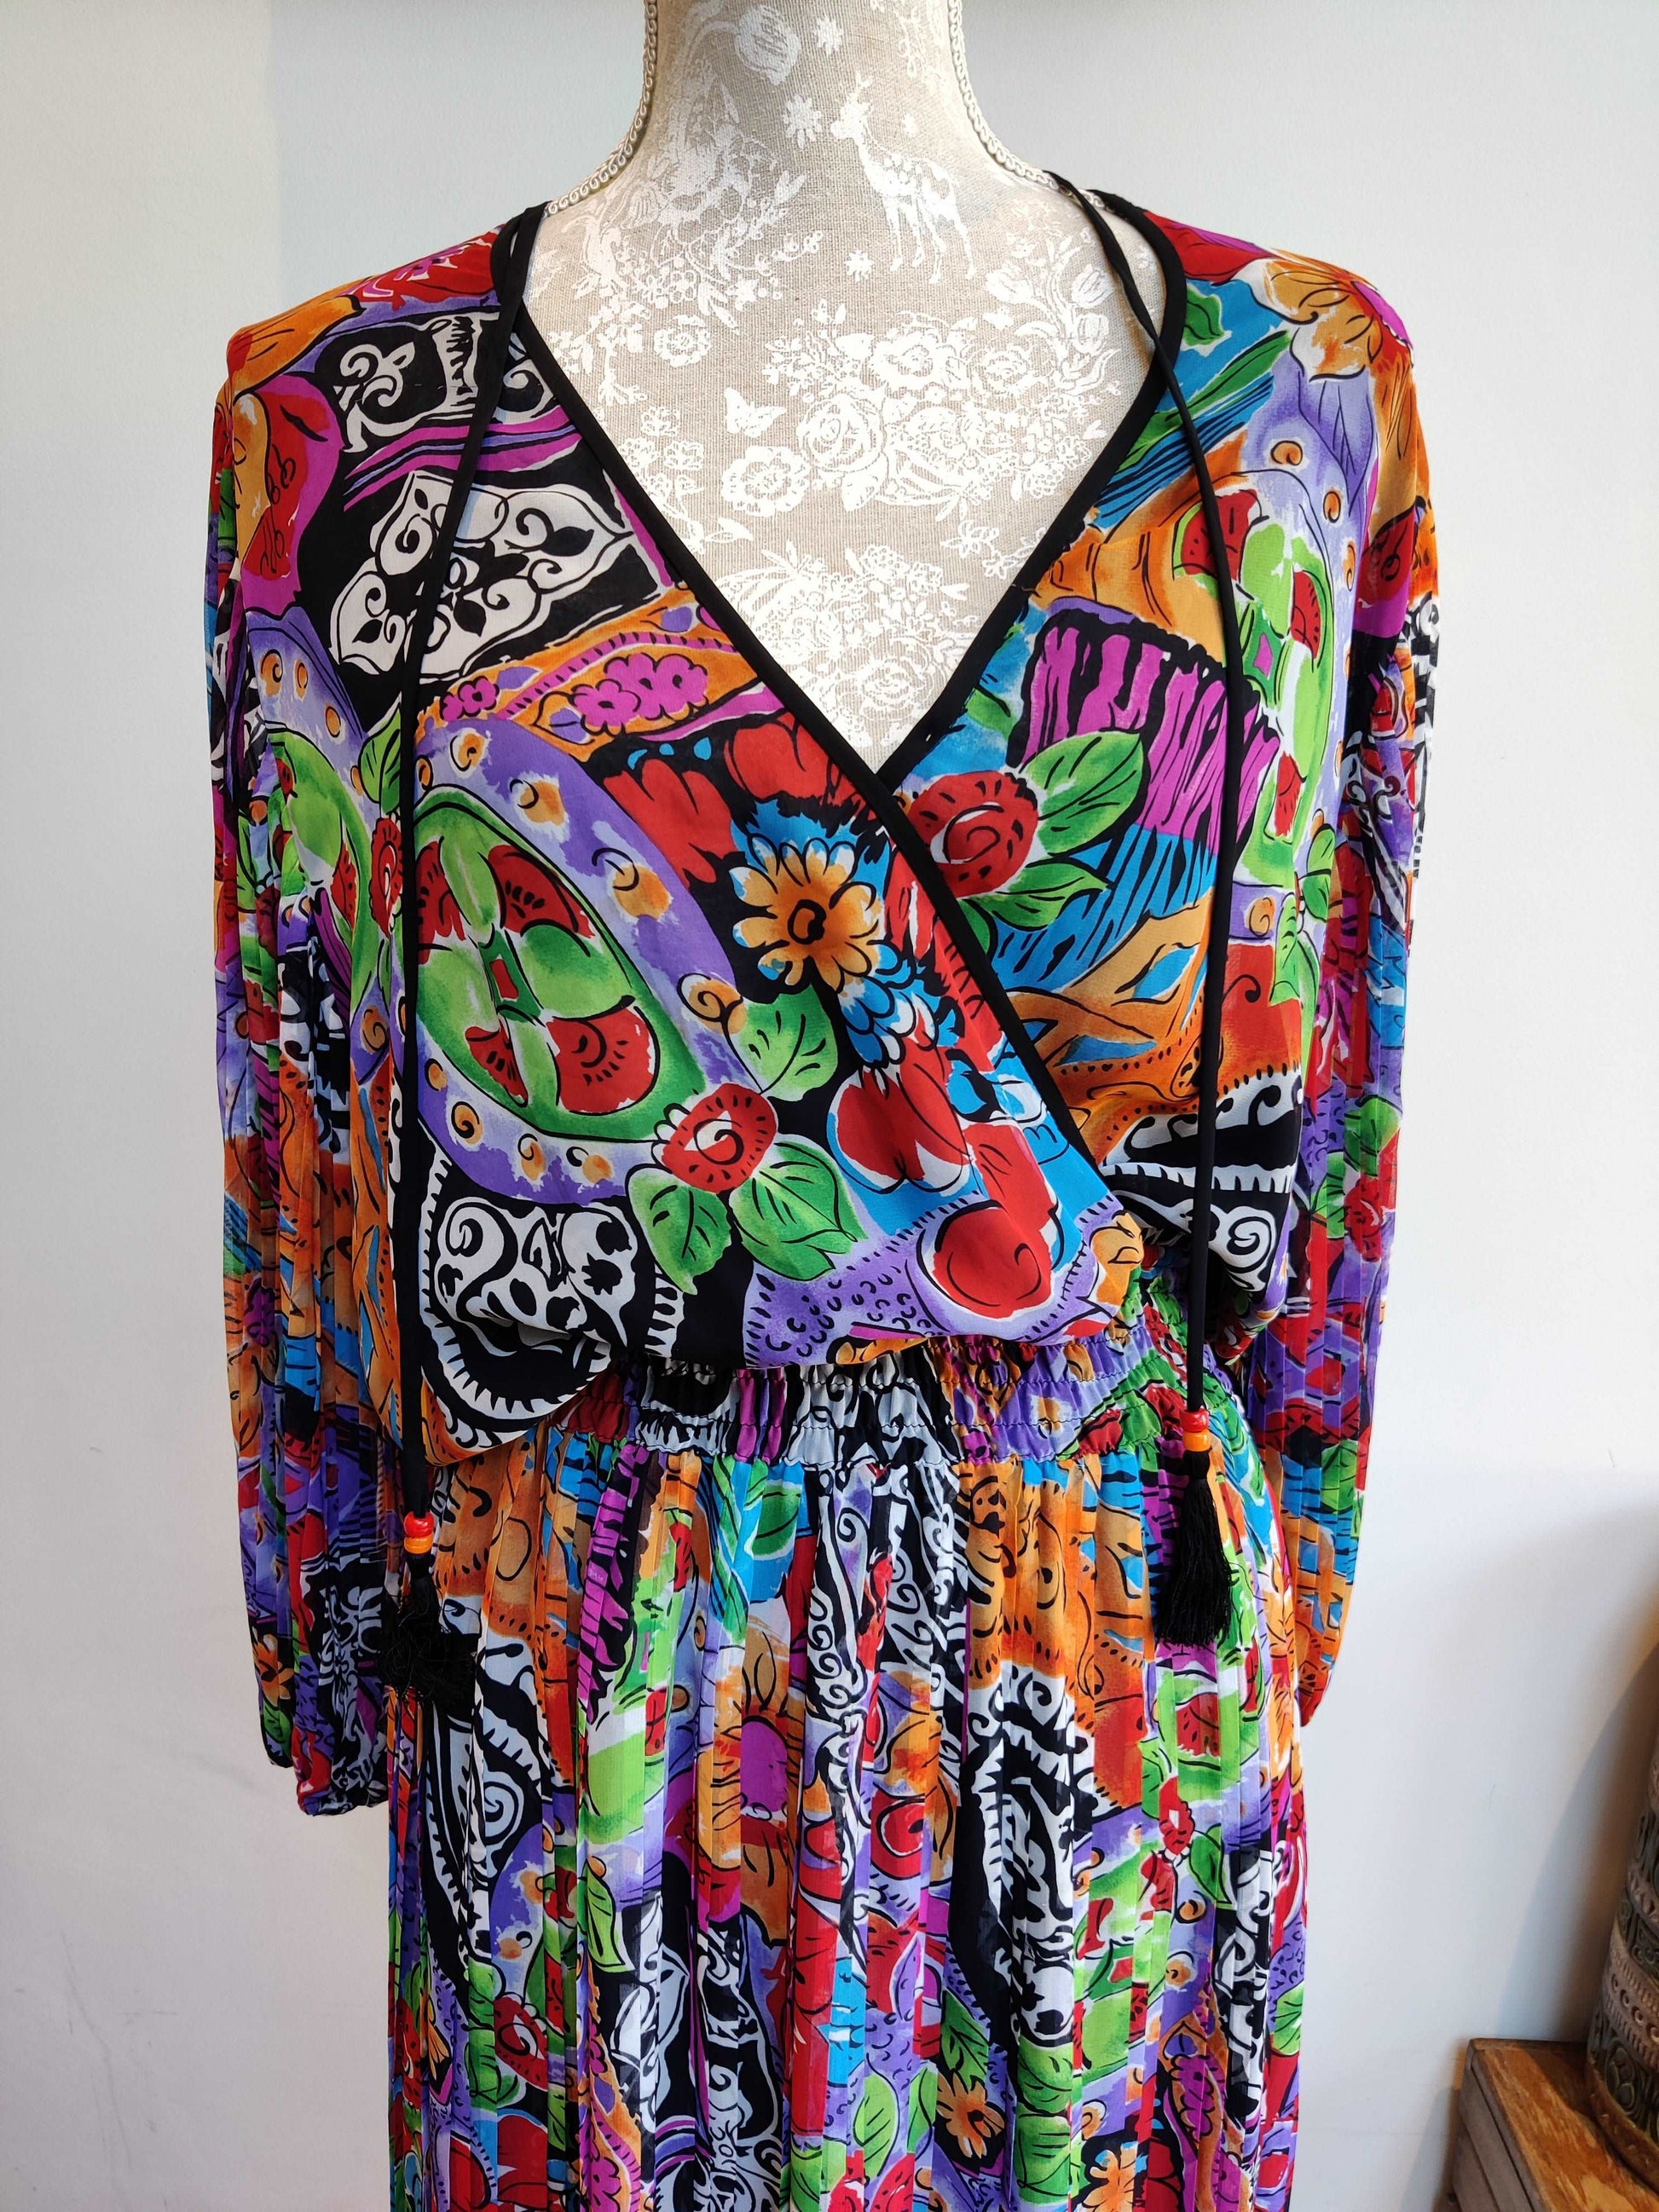 Stunning multicoloured 80s floral dress by Diane Freis.